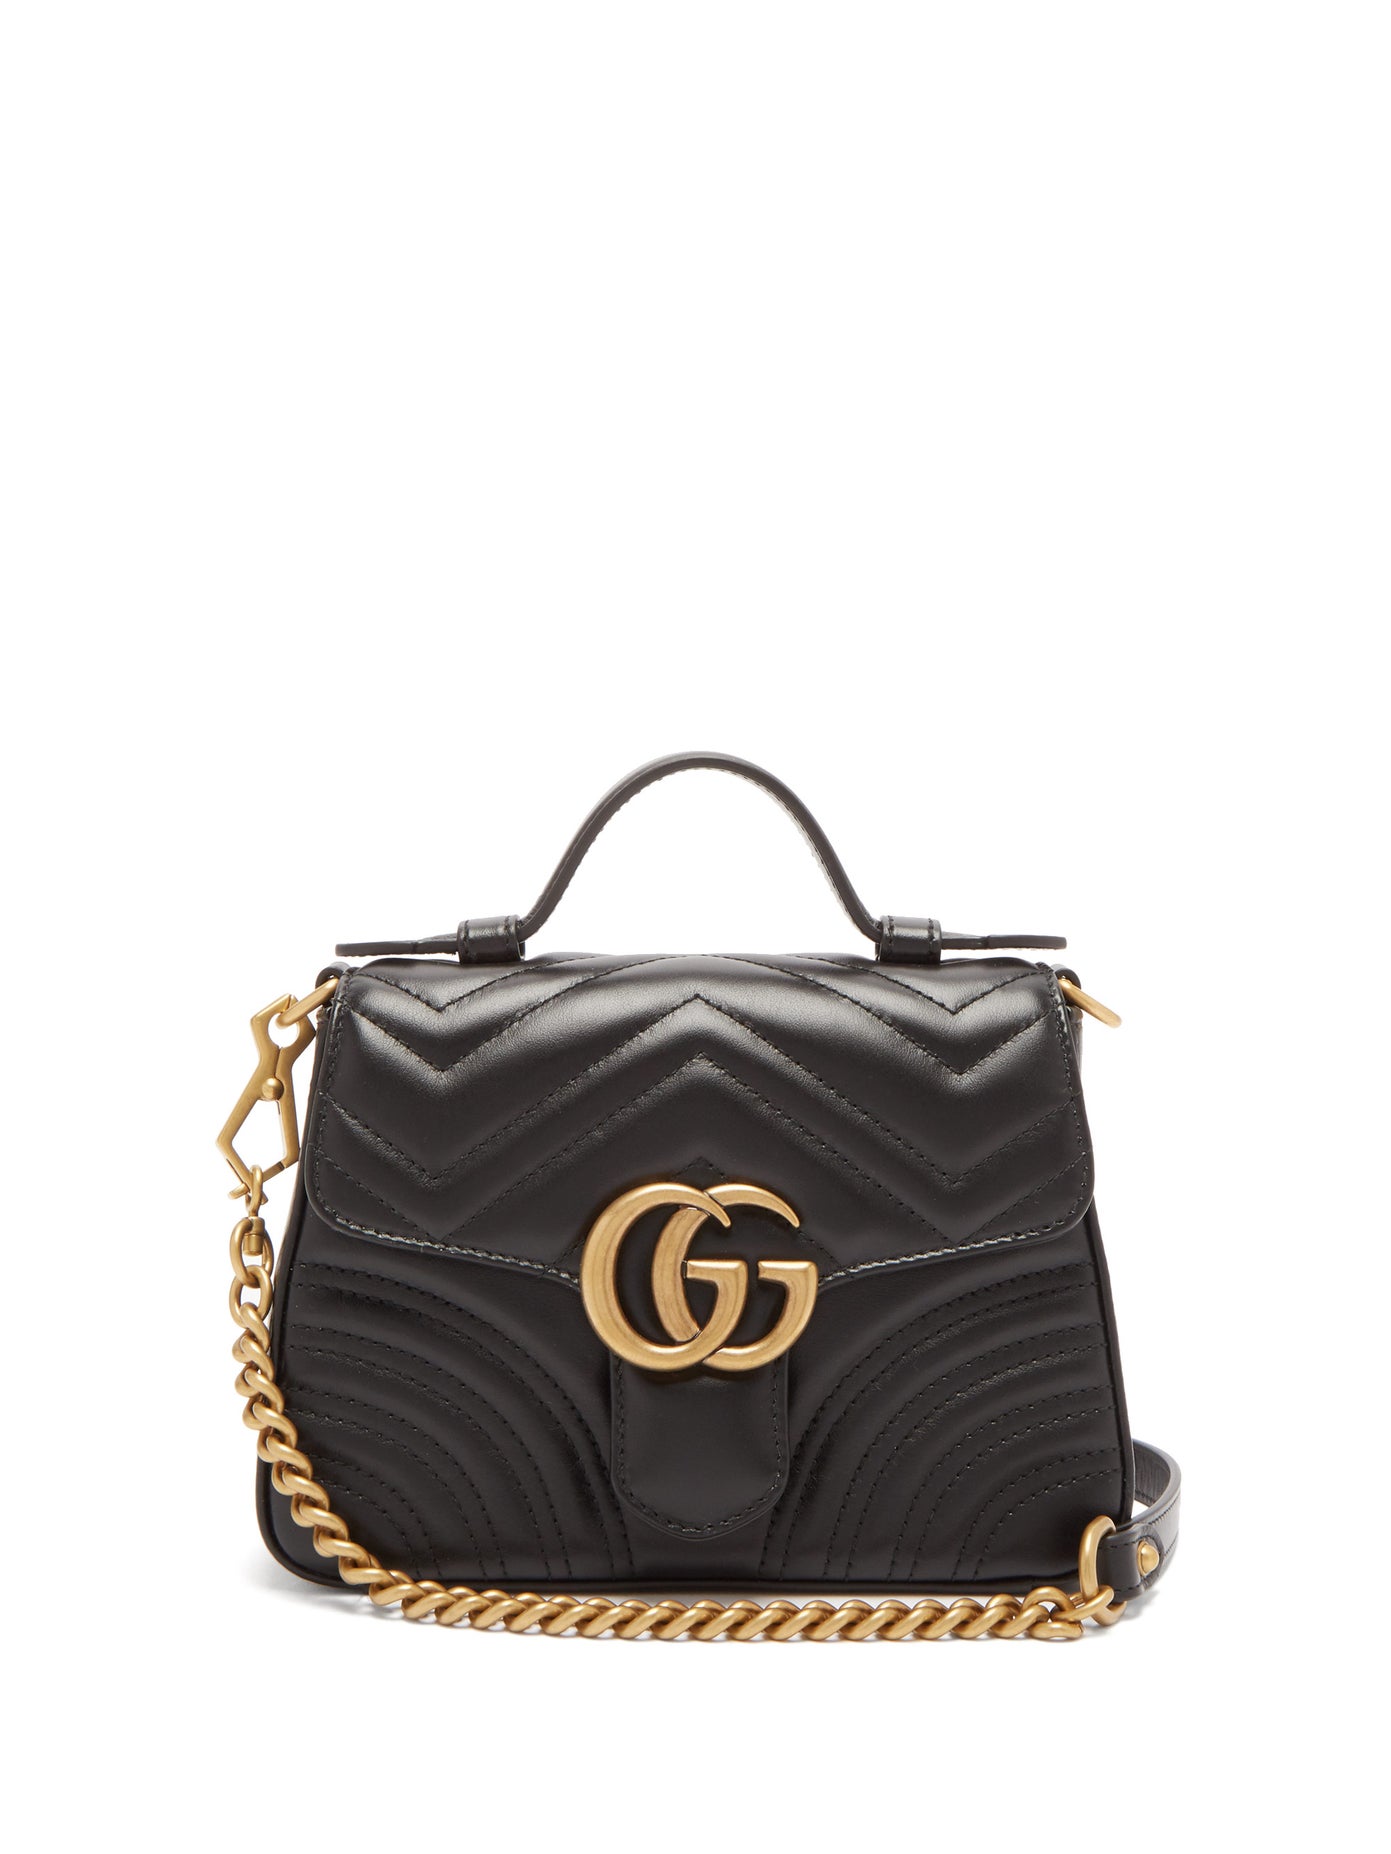 Gucci - Gg Marmont Mini Quilted-Leather Cross-Body Bag | ABOUT ICONS